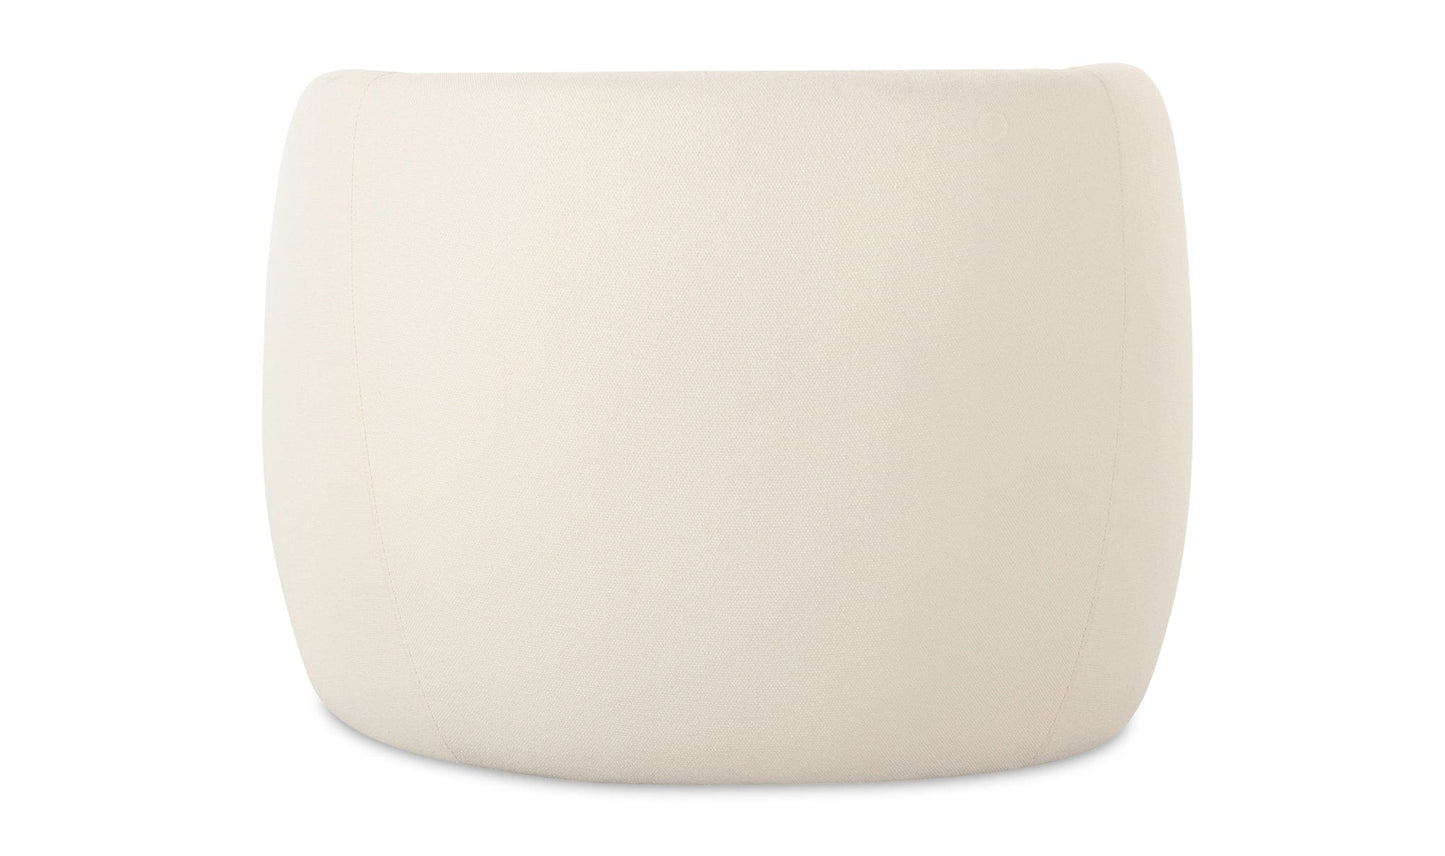 Moe's RAE OUTDOOR ACCENT CHAIR CREAM